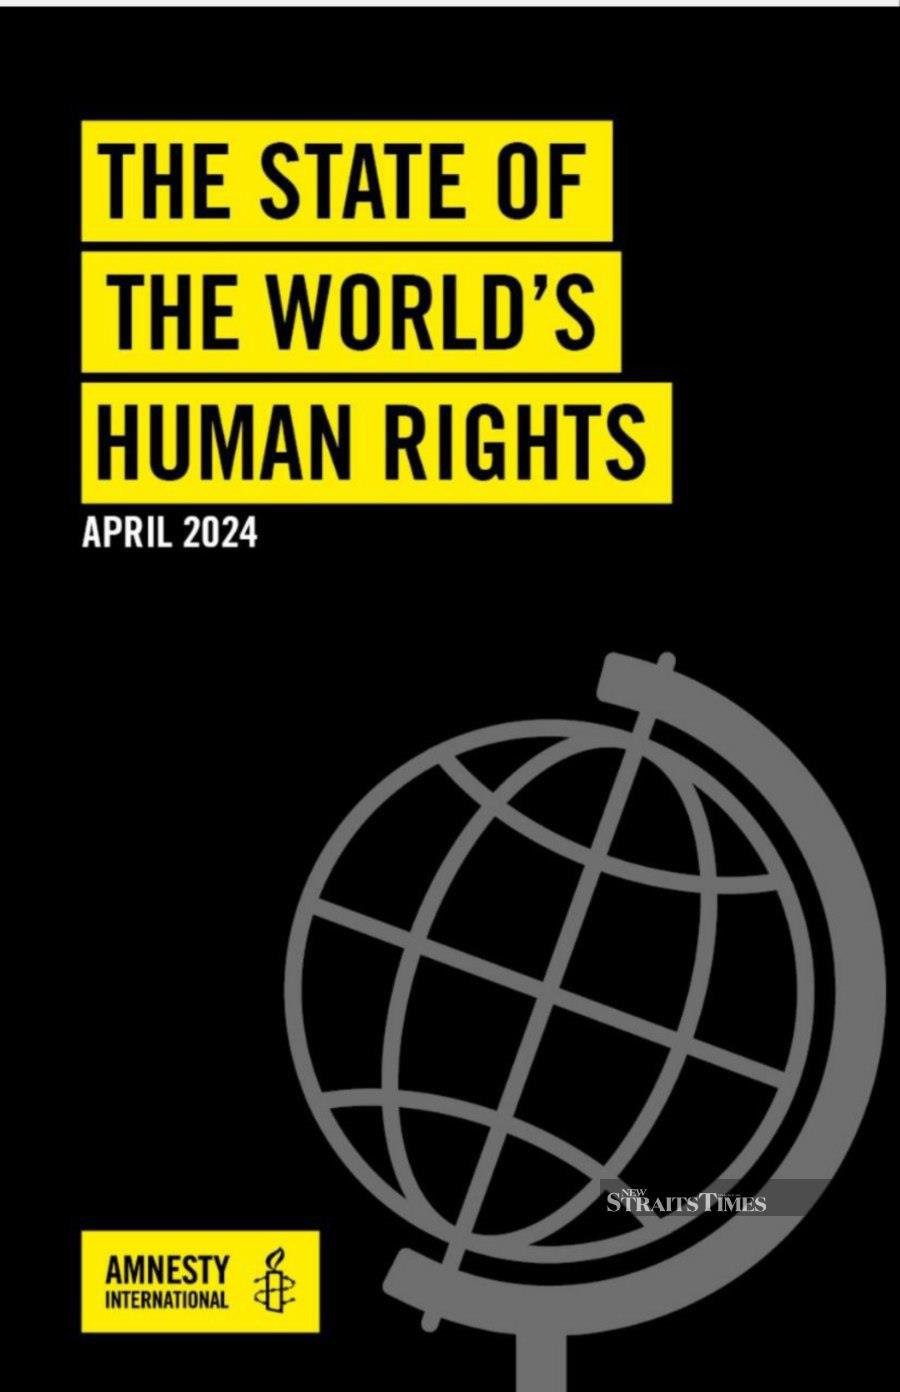 Amnesty International Malaysia executive director Katrina Jorene Maliamauv said its ‘The State of the World’s Human Rights’ report highlighted various developments where human rights concerns continued to persist in the country last year.